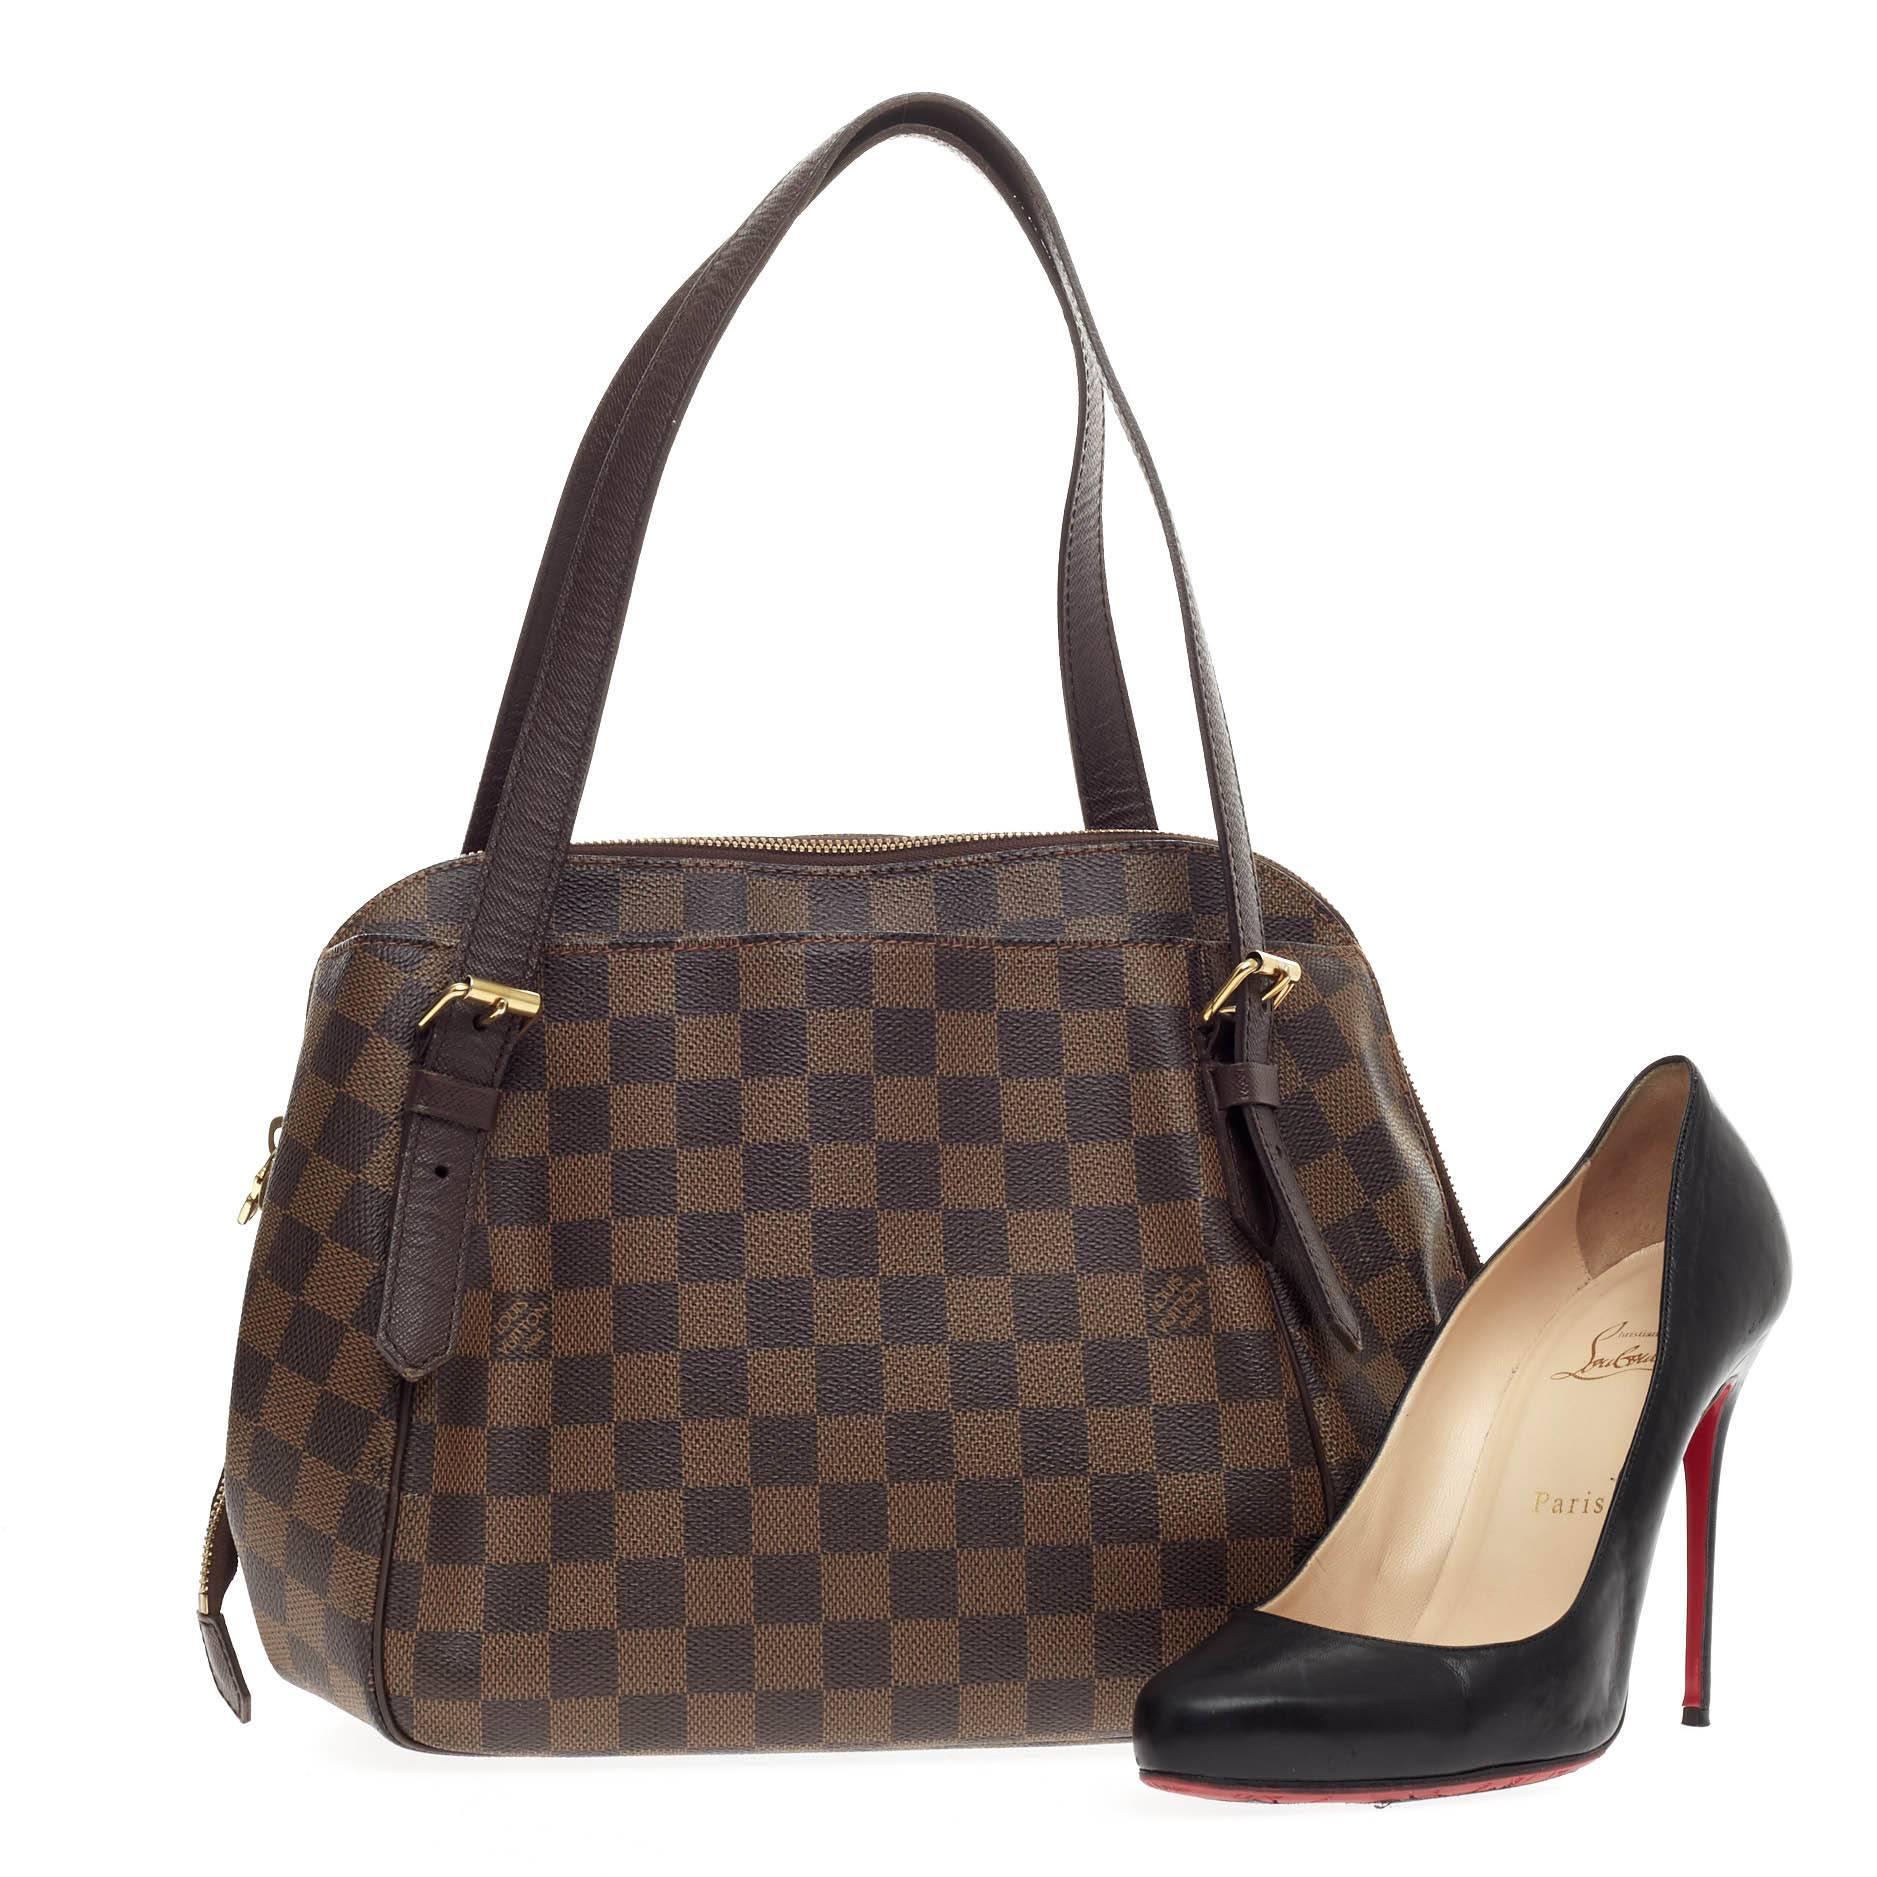 This authentic Louis Vuitton Belem Damier MM is a unique, functional everyday piece for any Louis Vuitton lover. Crafted from the brand's popular damier ebene canvas print, this tote features dual flat brown leather handles, brown leather piping,